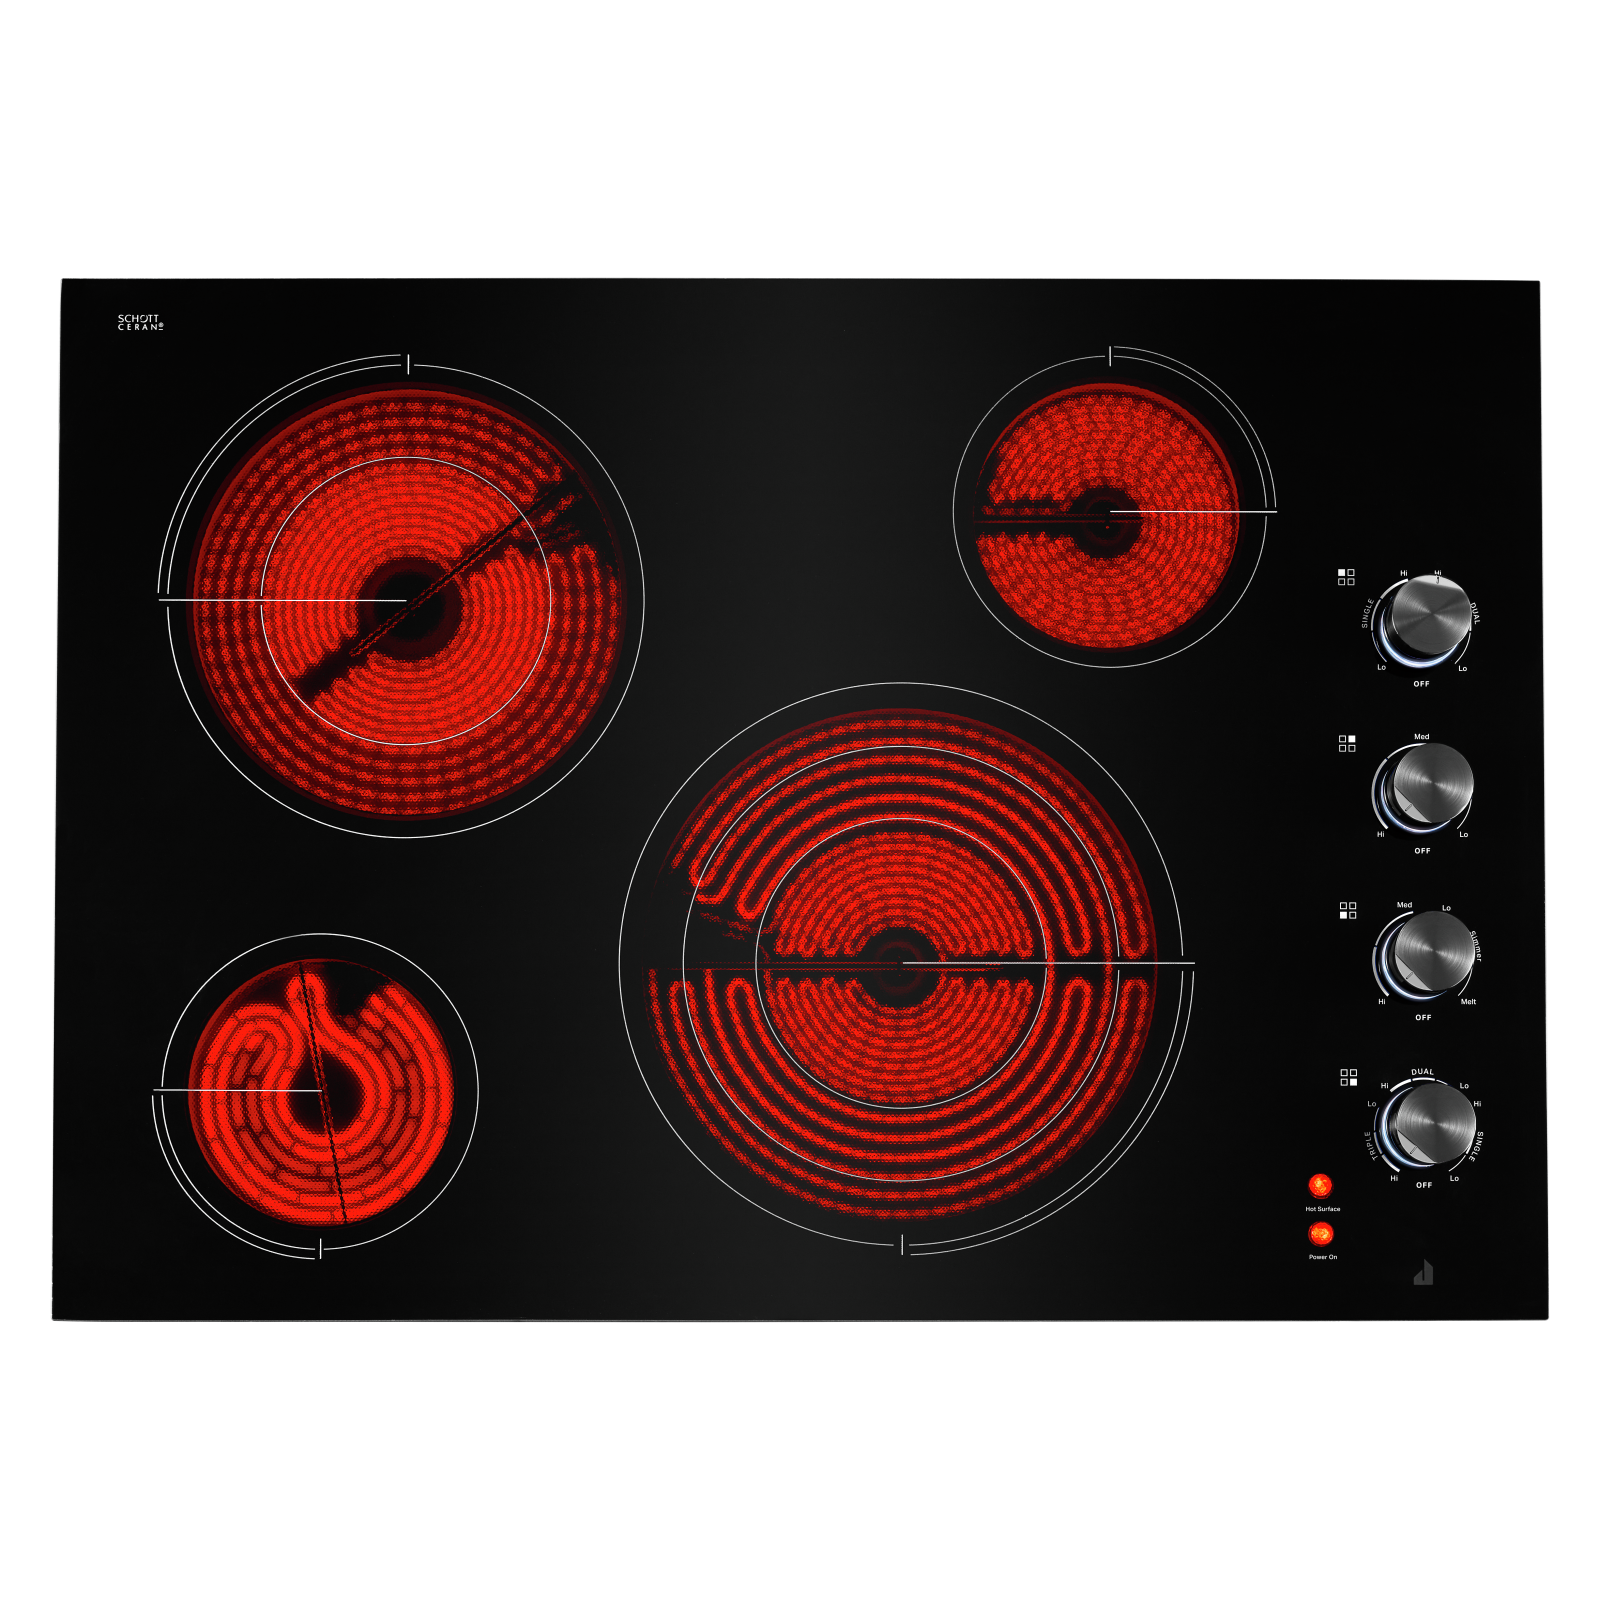 JennAir - 30.8125 inch wide Electric Cooktop in Black - JEC3430HB